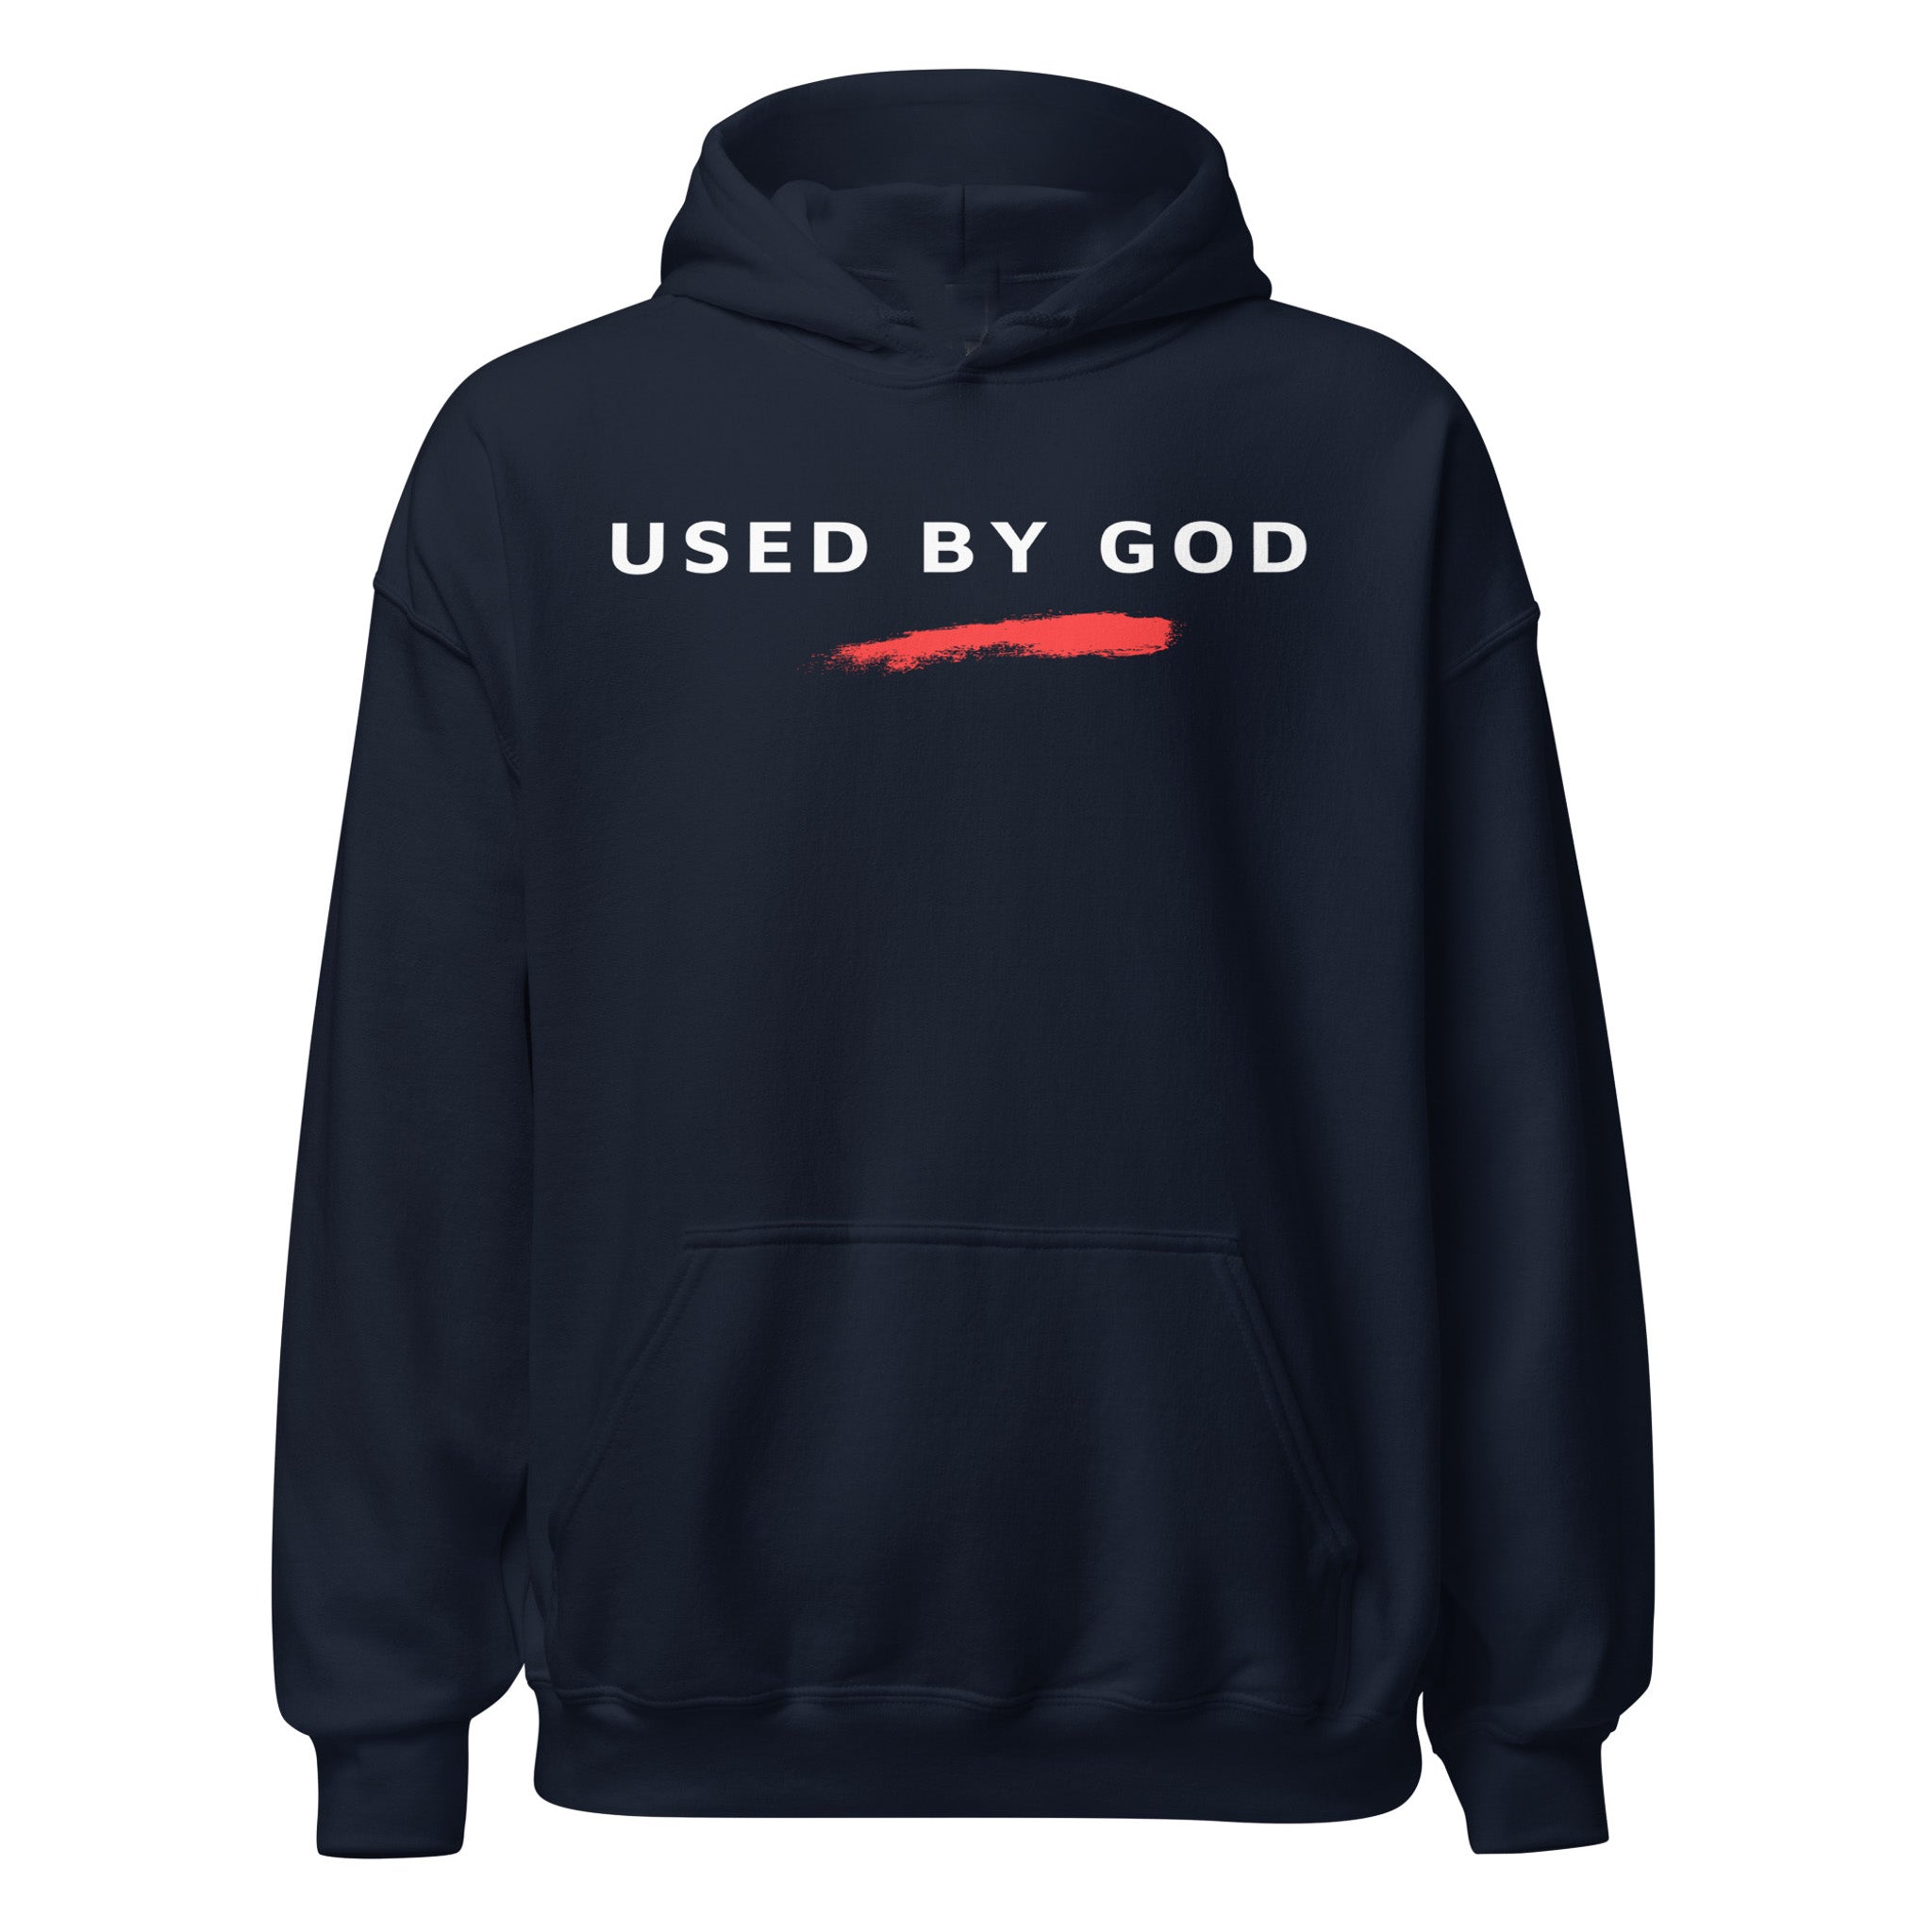 By His Stripes Hoodie, Used By God, Used By God Clothing, Christian Apparel, Christian Hoodies, Christian Clothing, Christian Shirts, God Shirts, Christian Sweatshirts, God Clothing, Jesus Hoodie, christian clothing t shirts, Jesus Clothes, t-shirts about jesus, hoodies near me, Christian Tshirts, God Is Dope, Art Of Homage, Red Letter Clothing, Elevated Faith, Active Faith Sports, Beacon Threads, God The Father Apparel